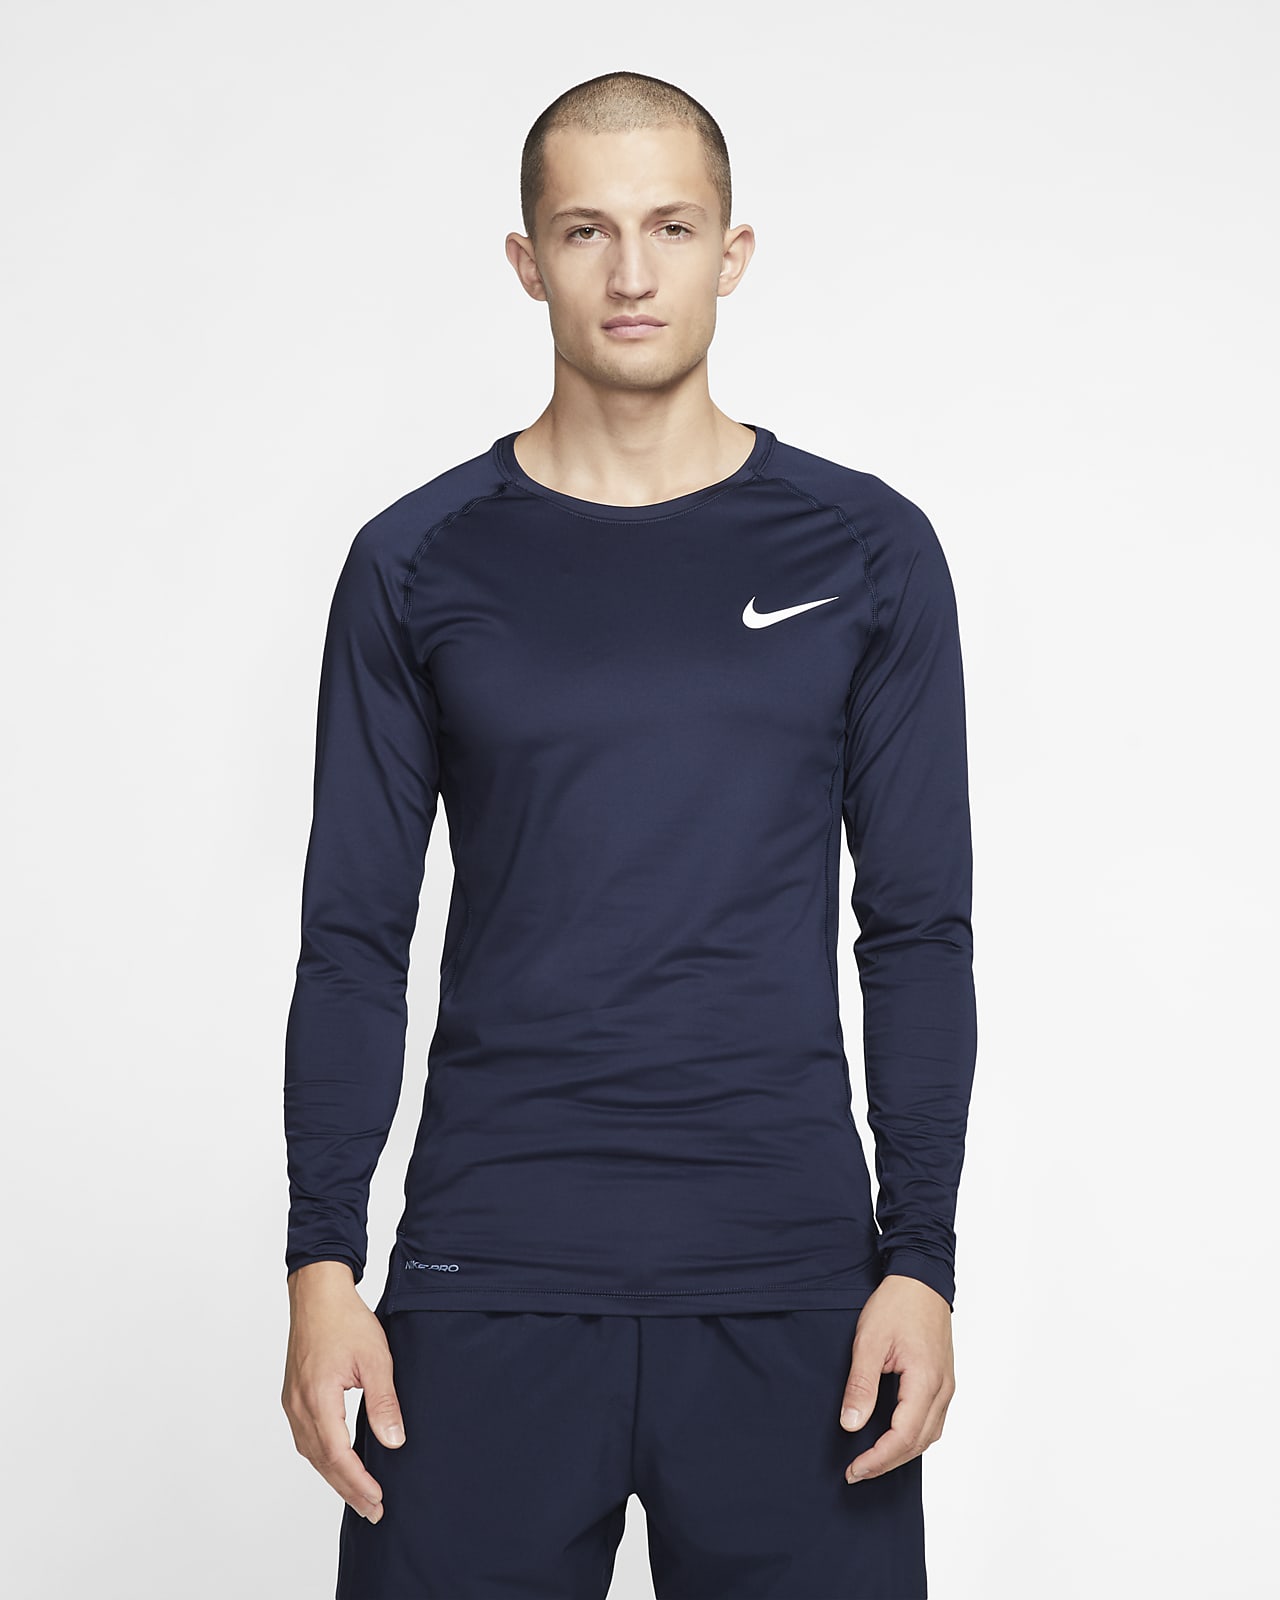 Nike Pro Men's Tight-Fit Long-Sleeve Top